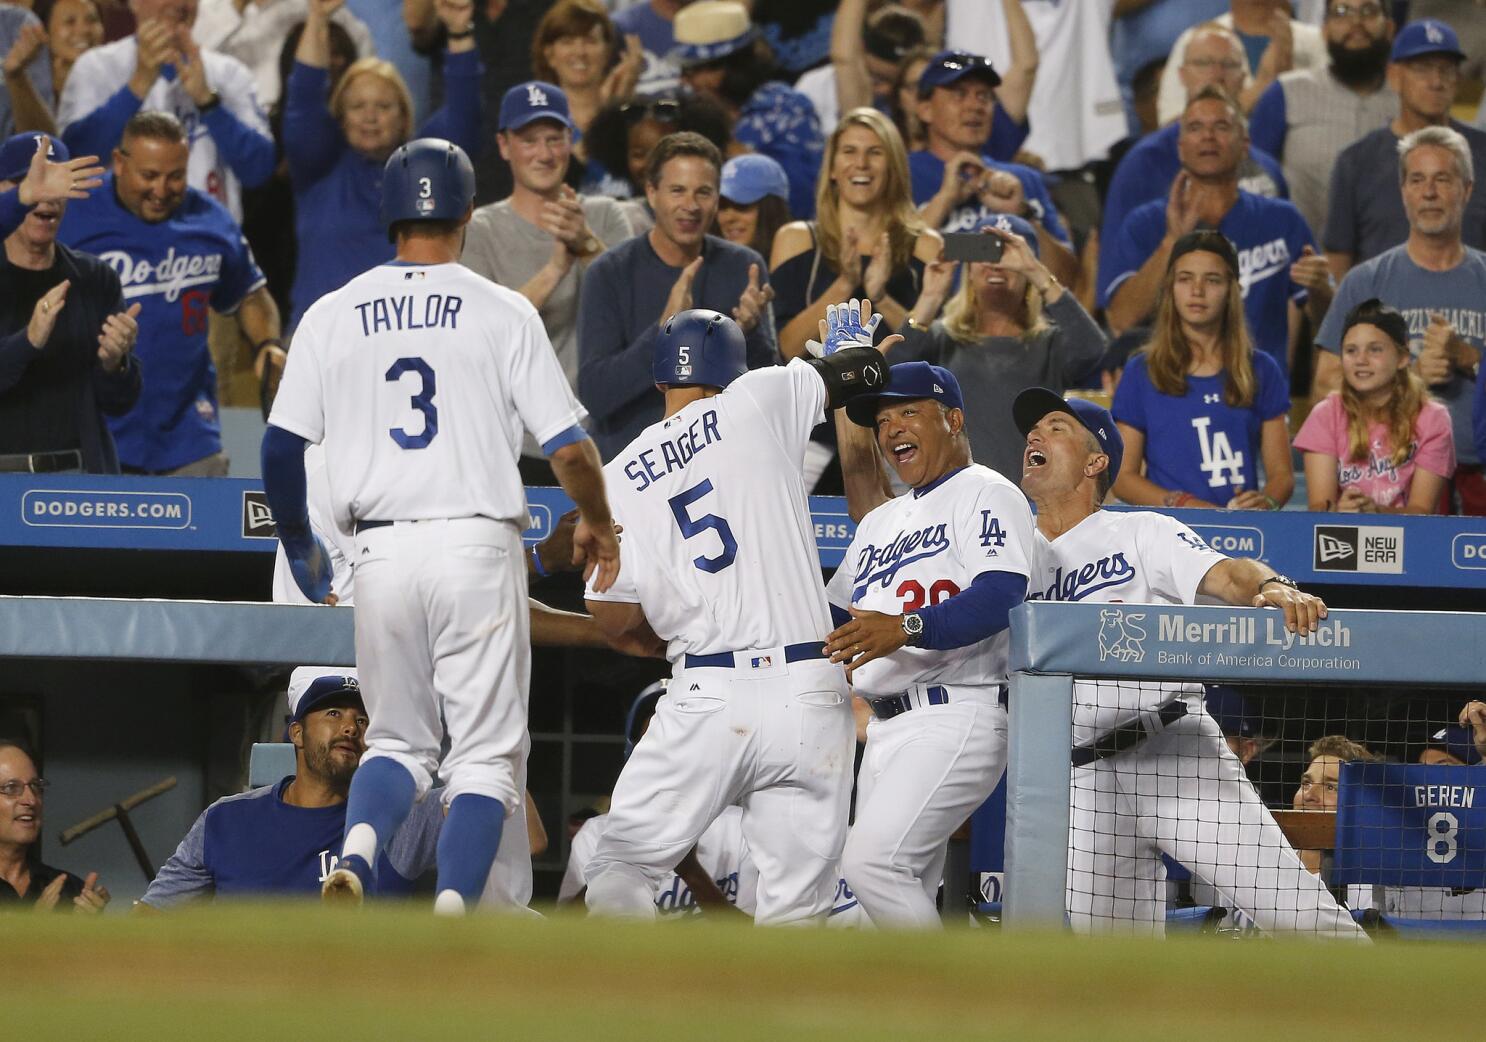 Kyle Farmer's first career hit gives Dodgers walk-off win over Giants